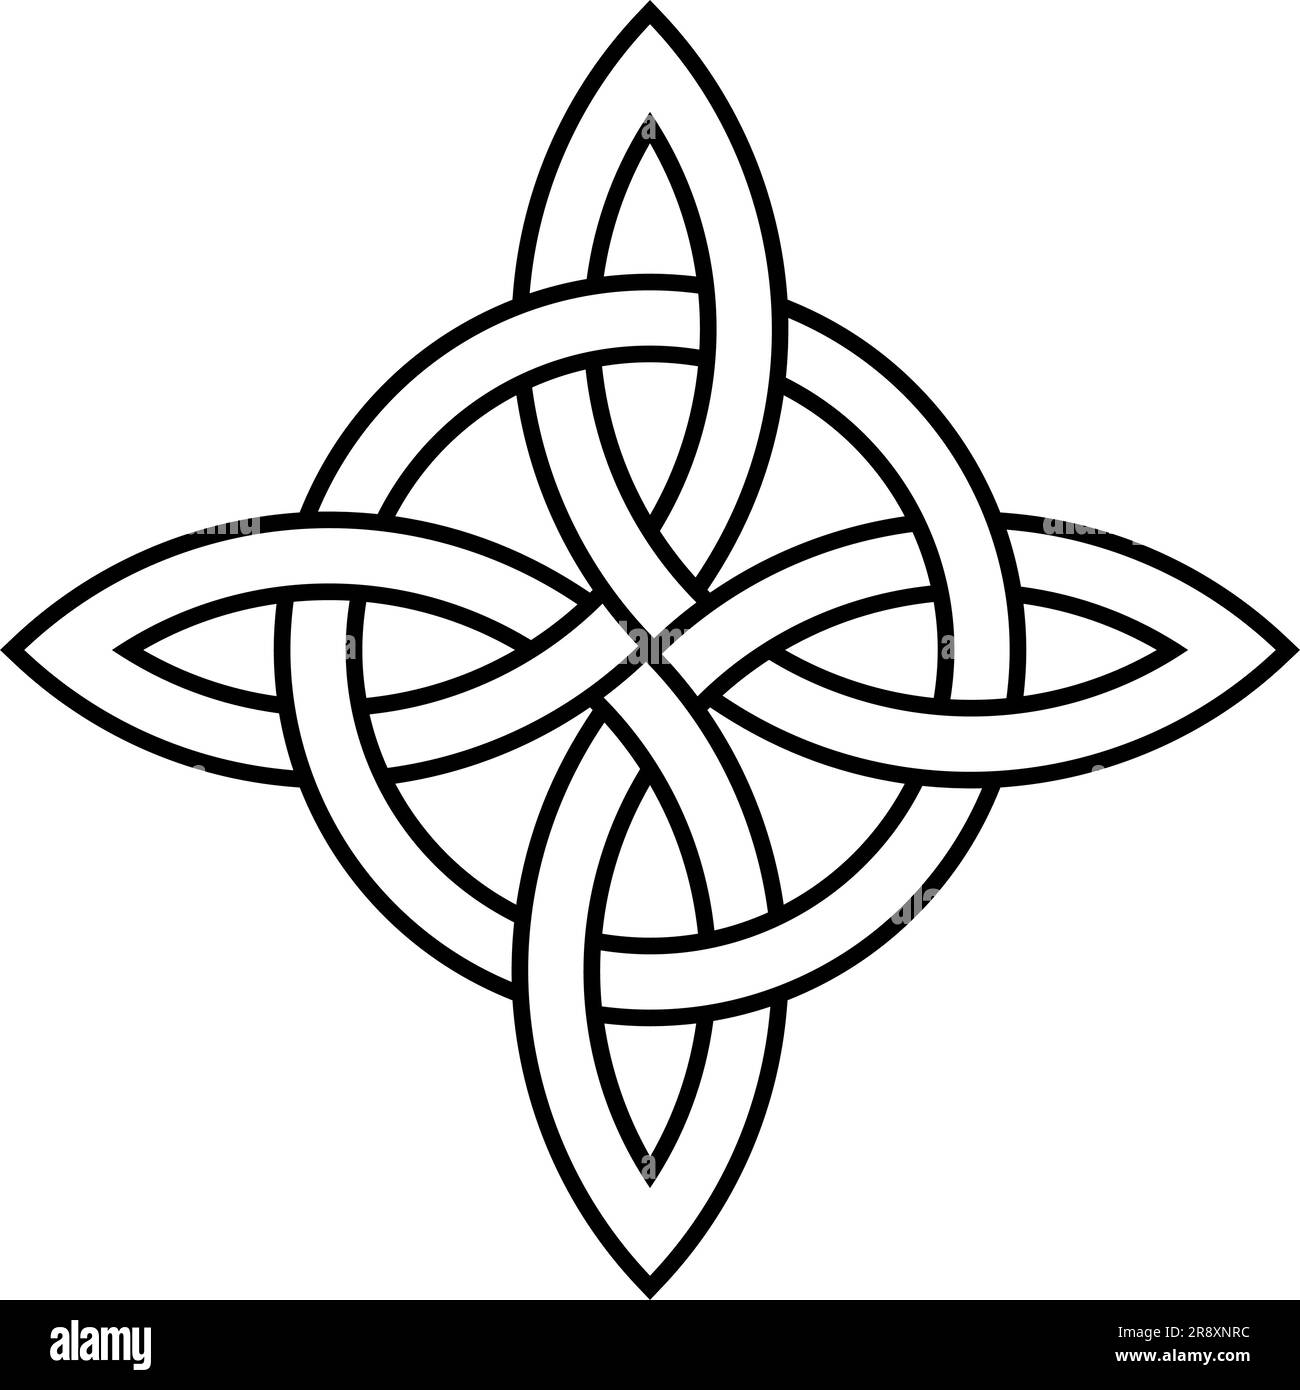 Bowen knot in black outline. Celtic symbol known as true lover's knot.  The Bowen knot symbolizes a man's true love and loyalty to his woman. Stock Vector